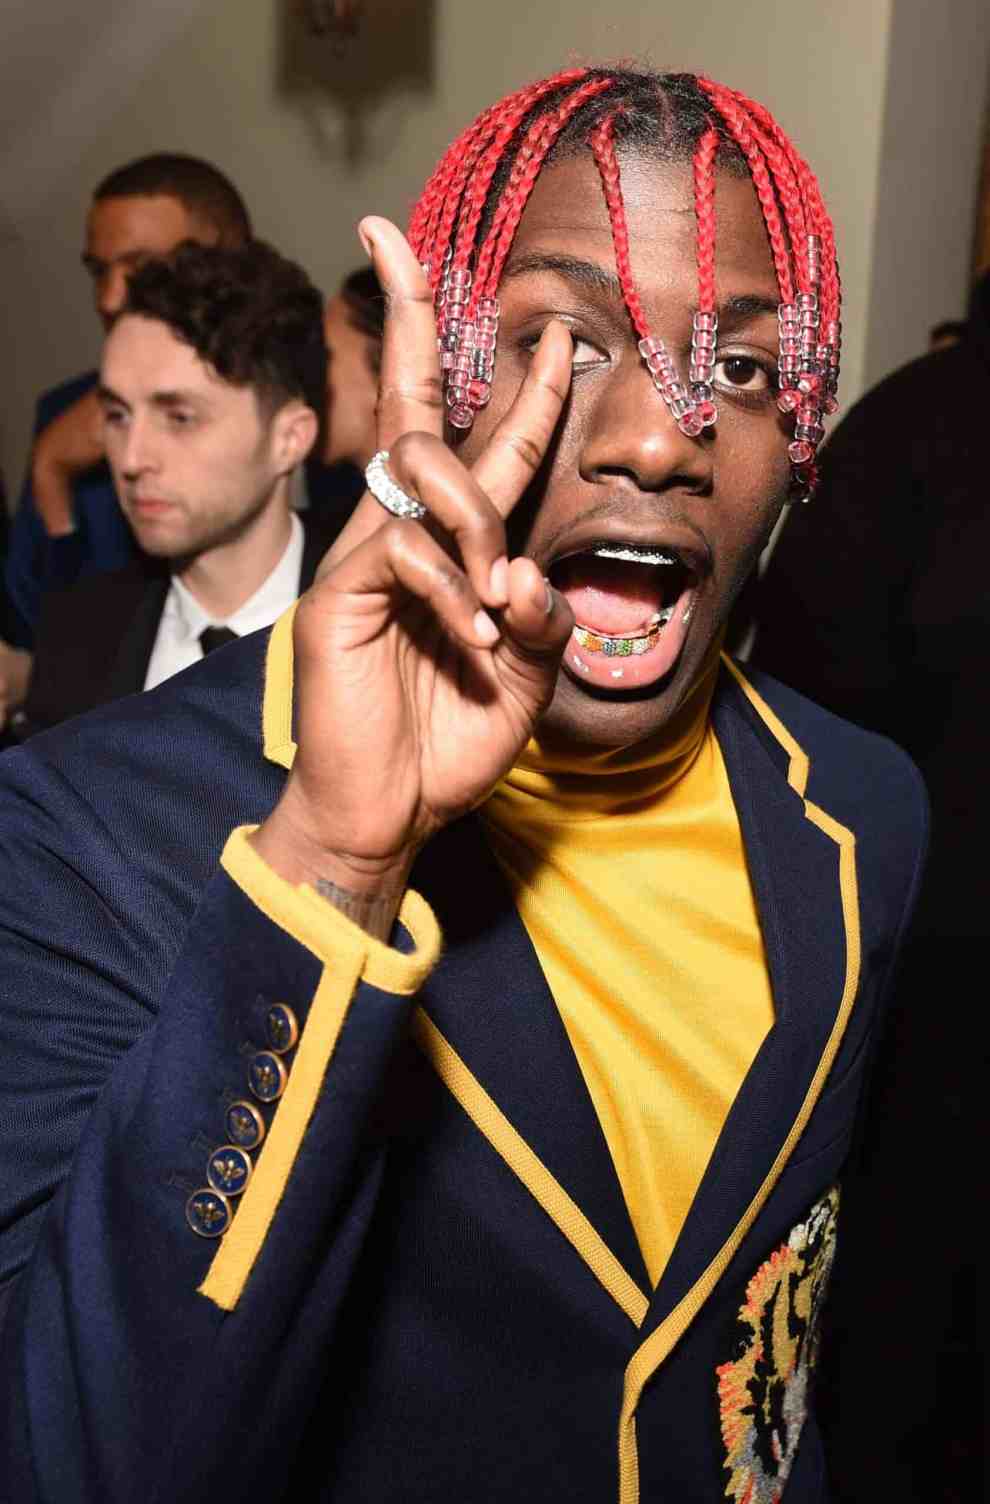 Lil Yachty with red dreads and rainbow grill at grammys